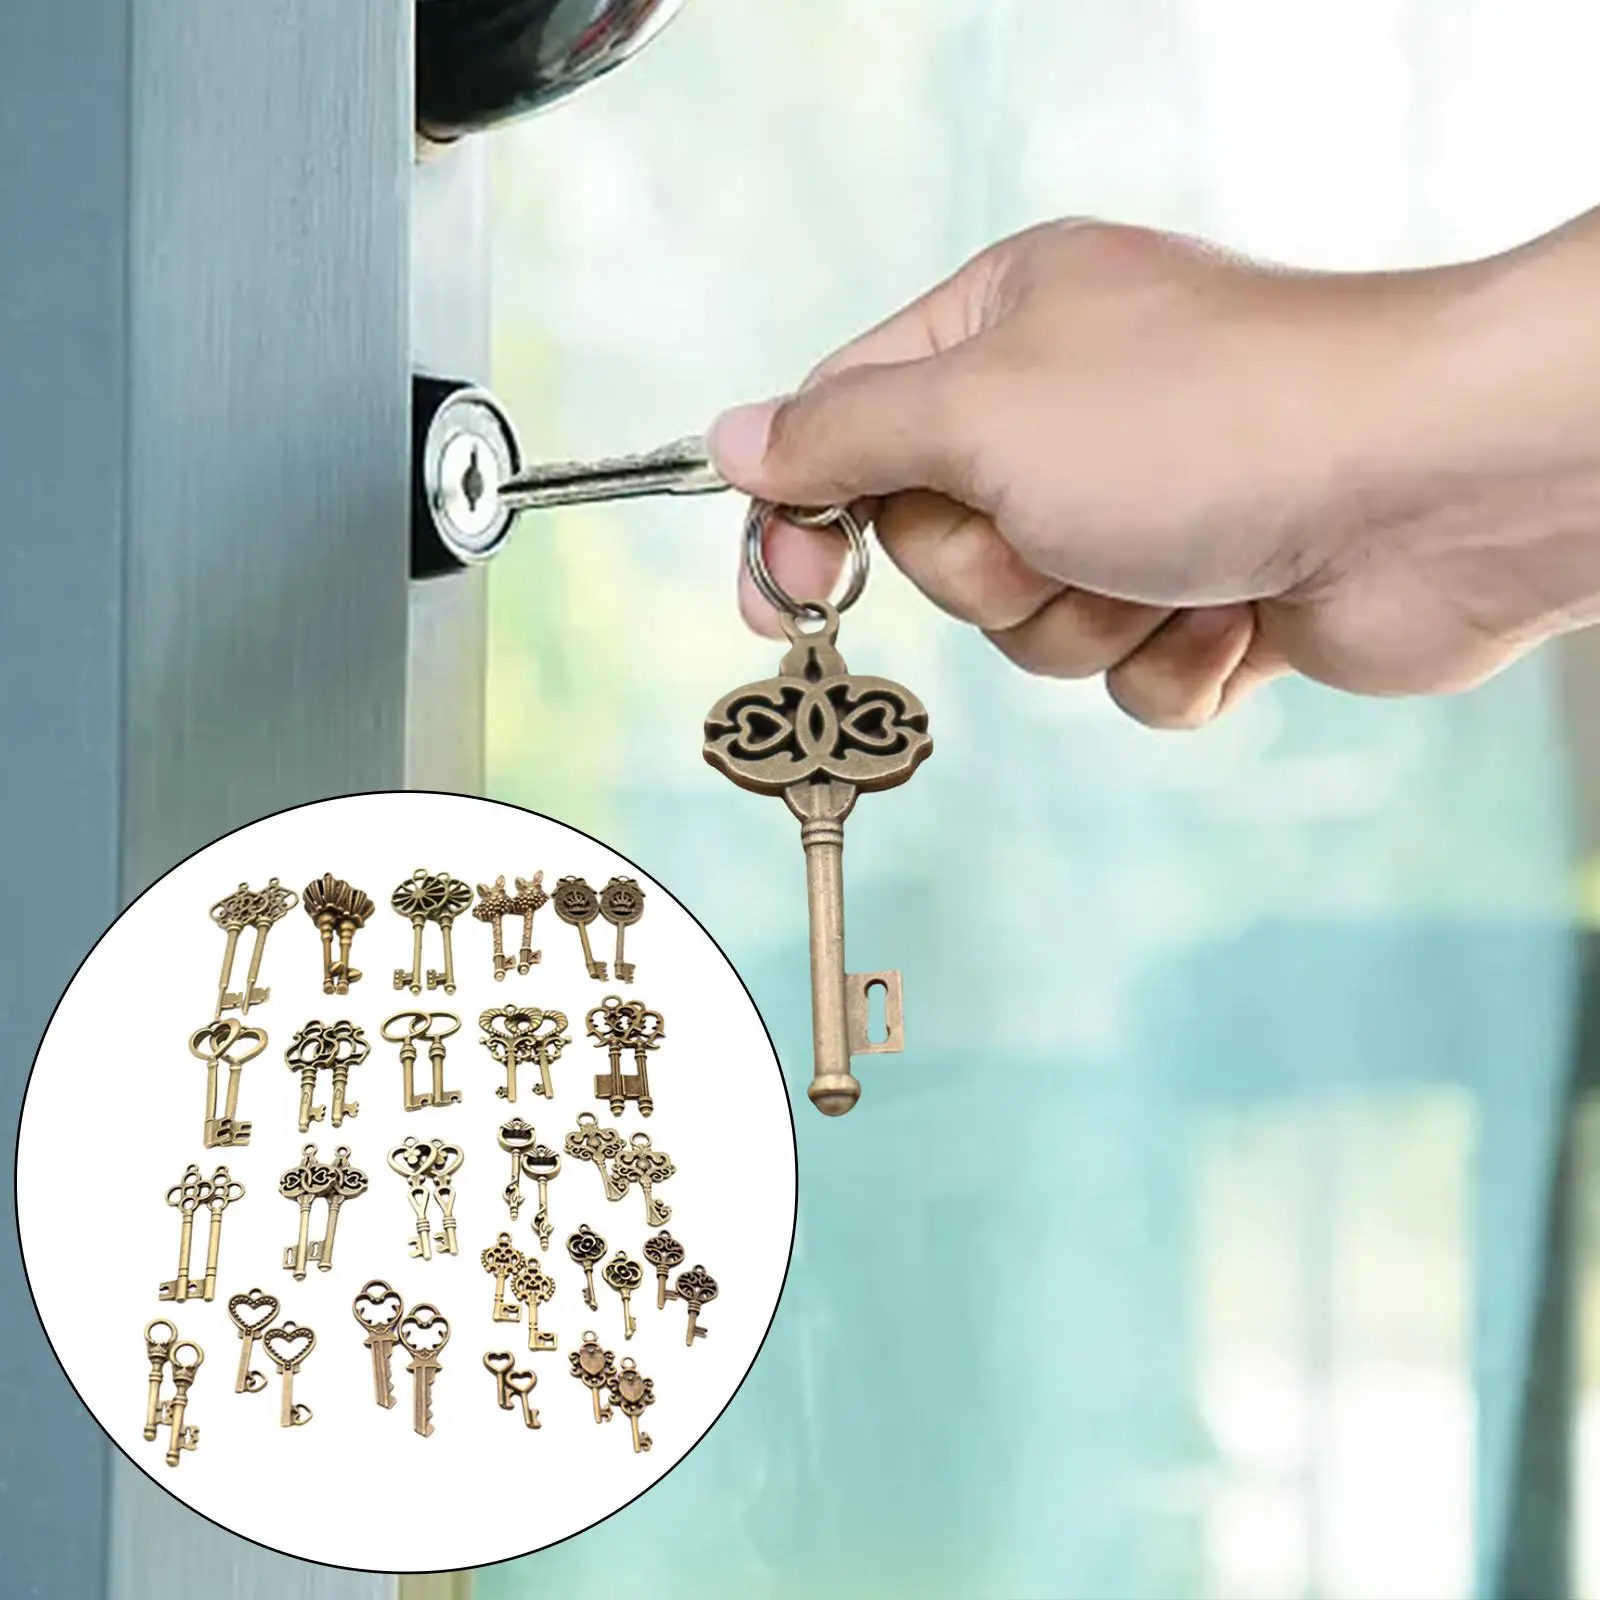 46x Skeleton Key Charms Antique Style Pendants for Jewelry Findings Making Accessory Key Chains Birthday Party Wedding Favors